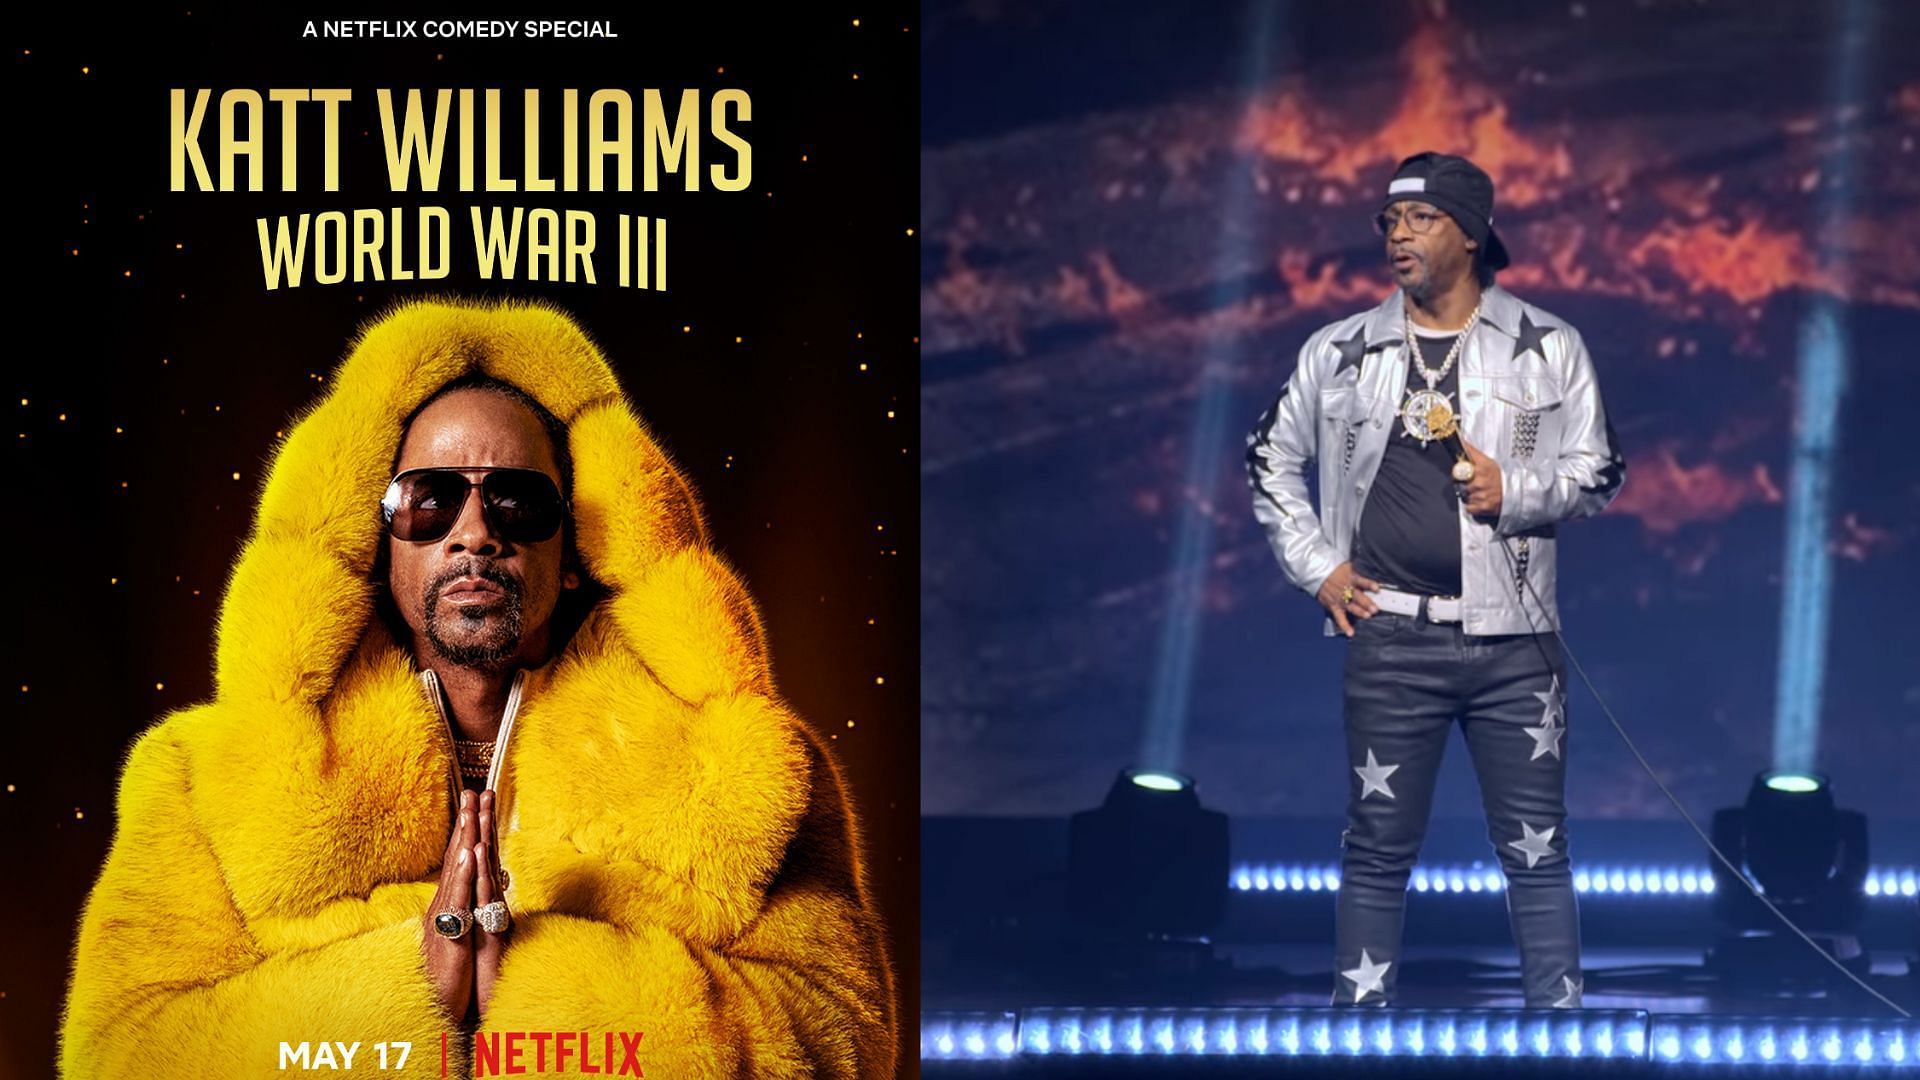 Netflix&#039;s stand-up comedy special Katt Williams: World War III is set to premiere on May 17 (Image via @strongblacklead/Twitter, Netflix)